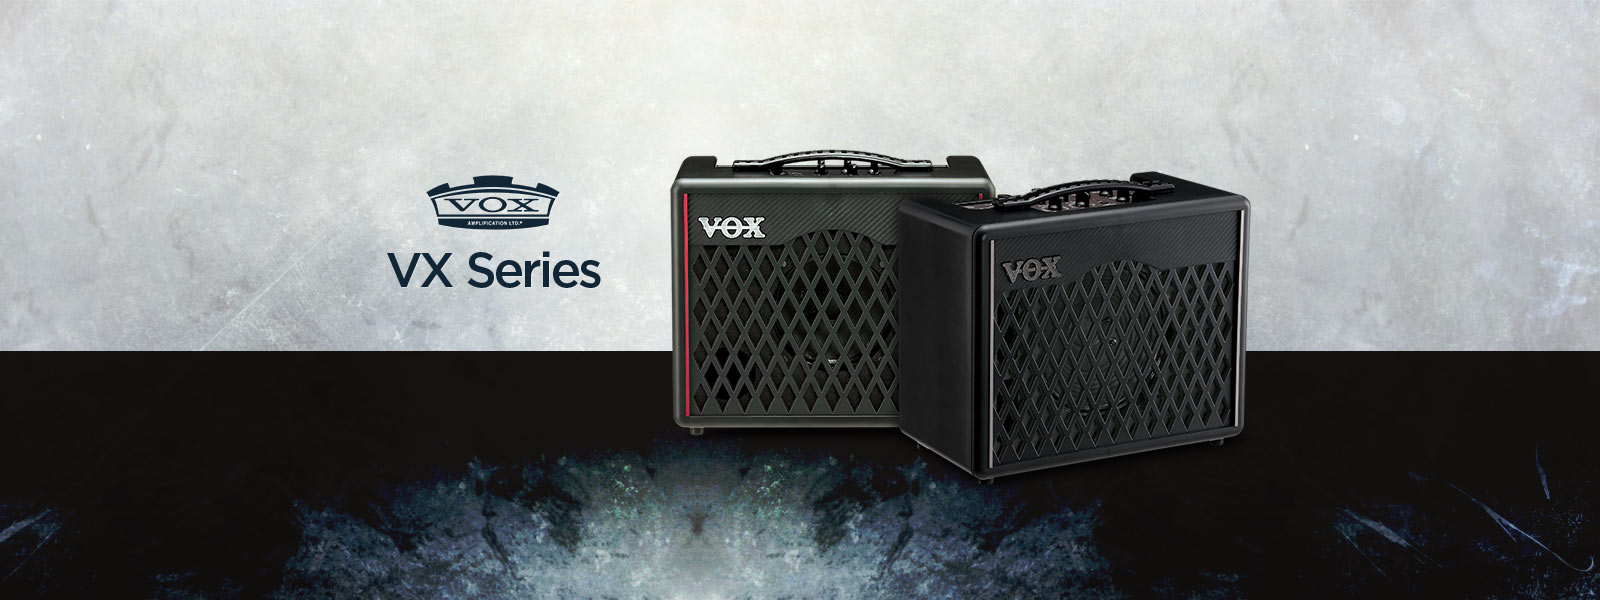 VOX V X Series Amplifiers